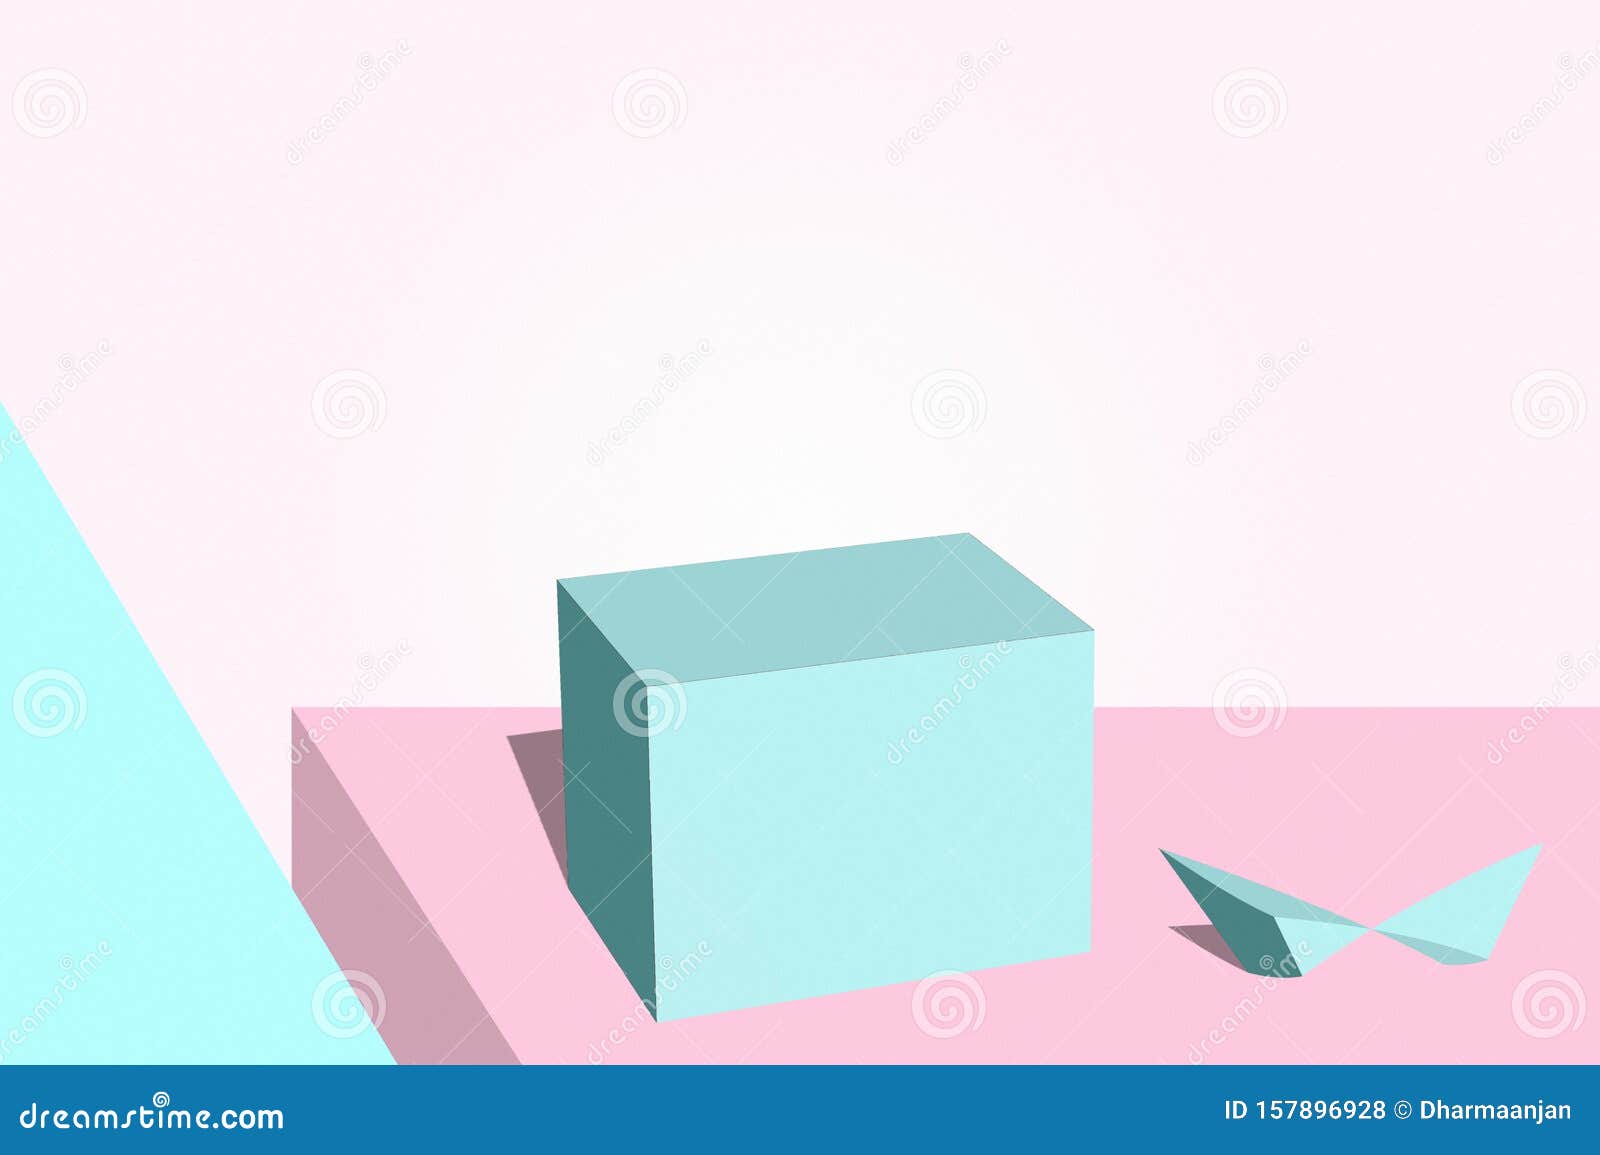 Product Photography Background Stock Illustration - Illustration of  interior, gradient: 157896928